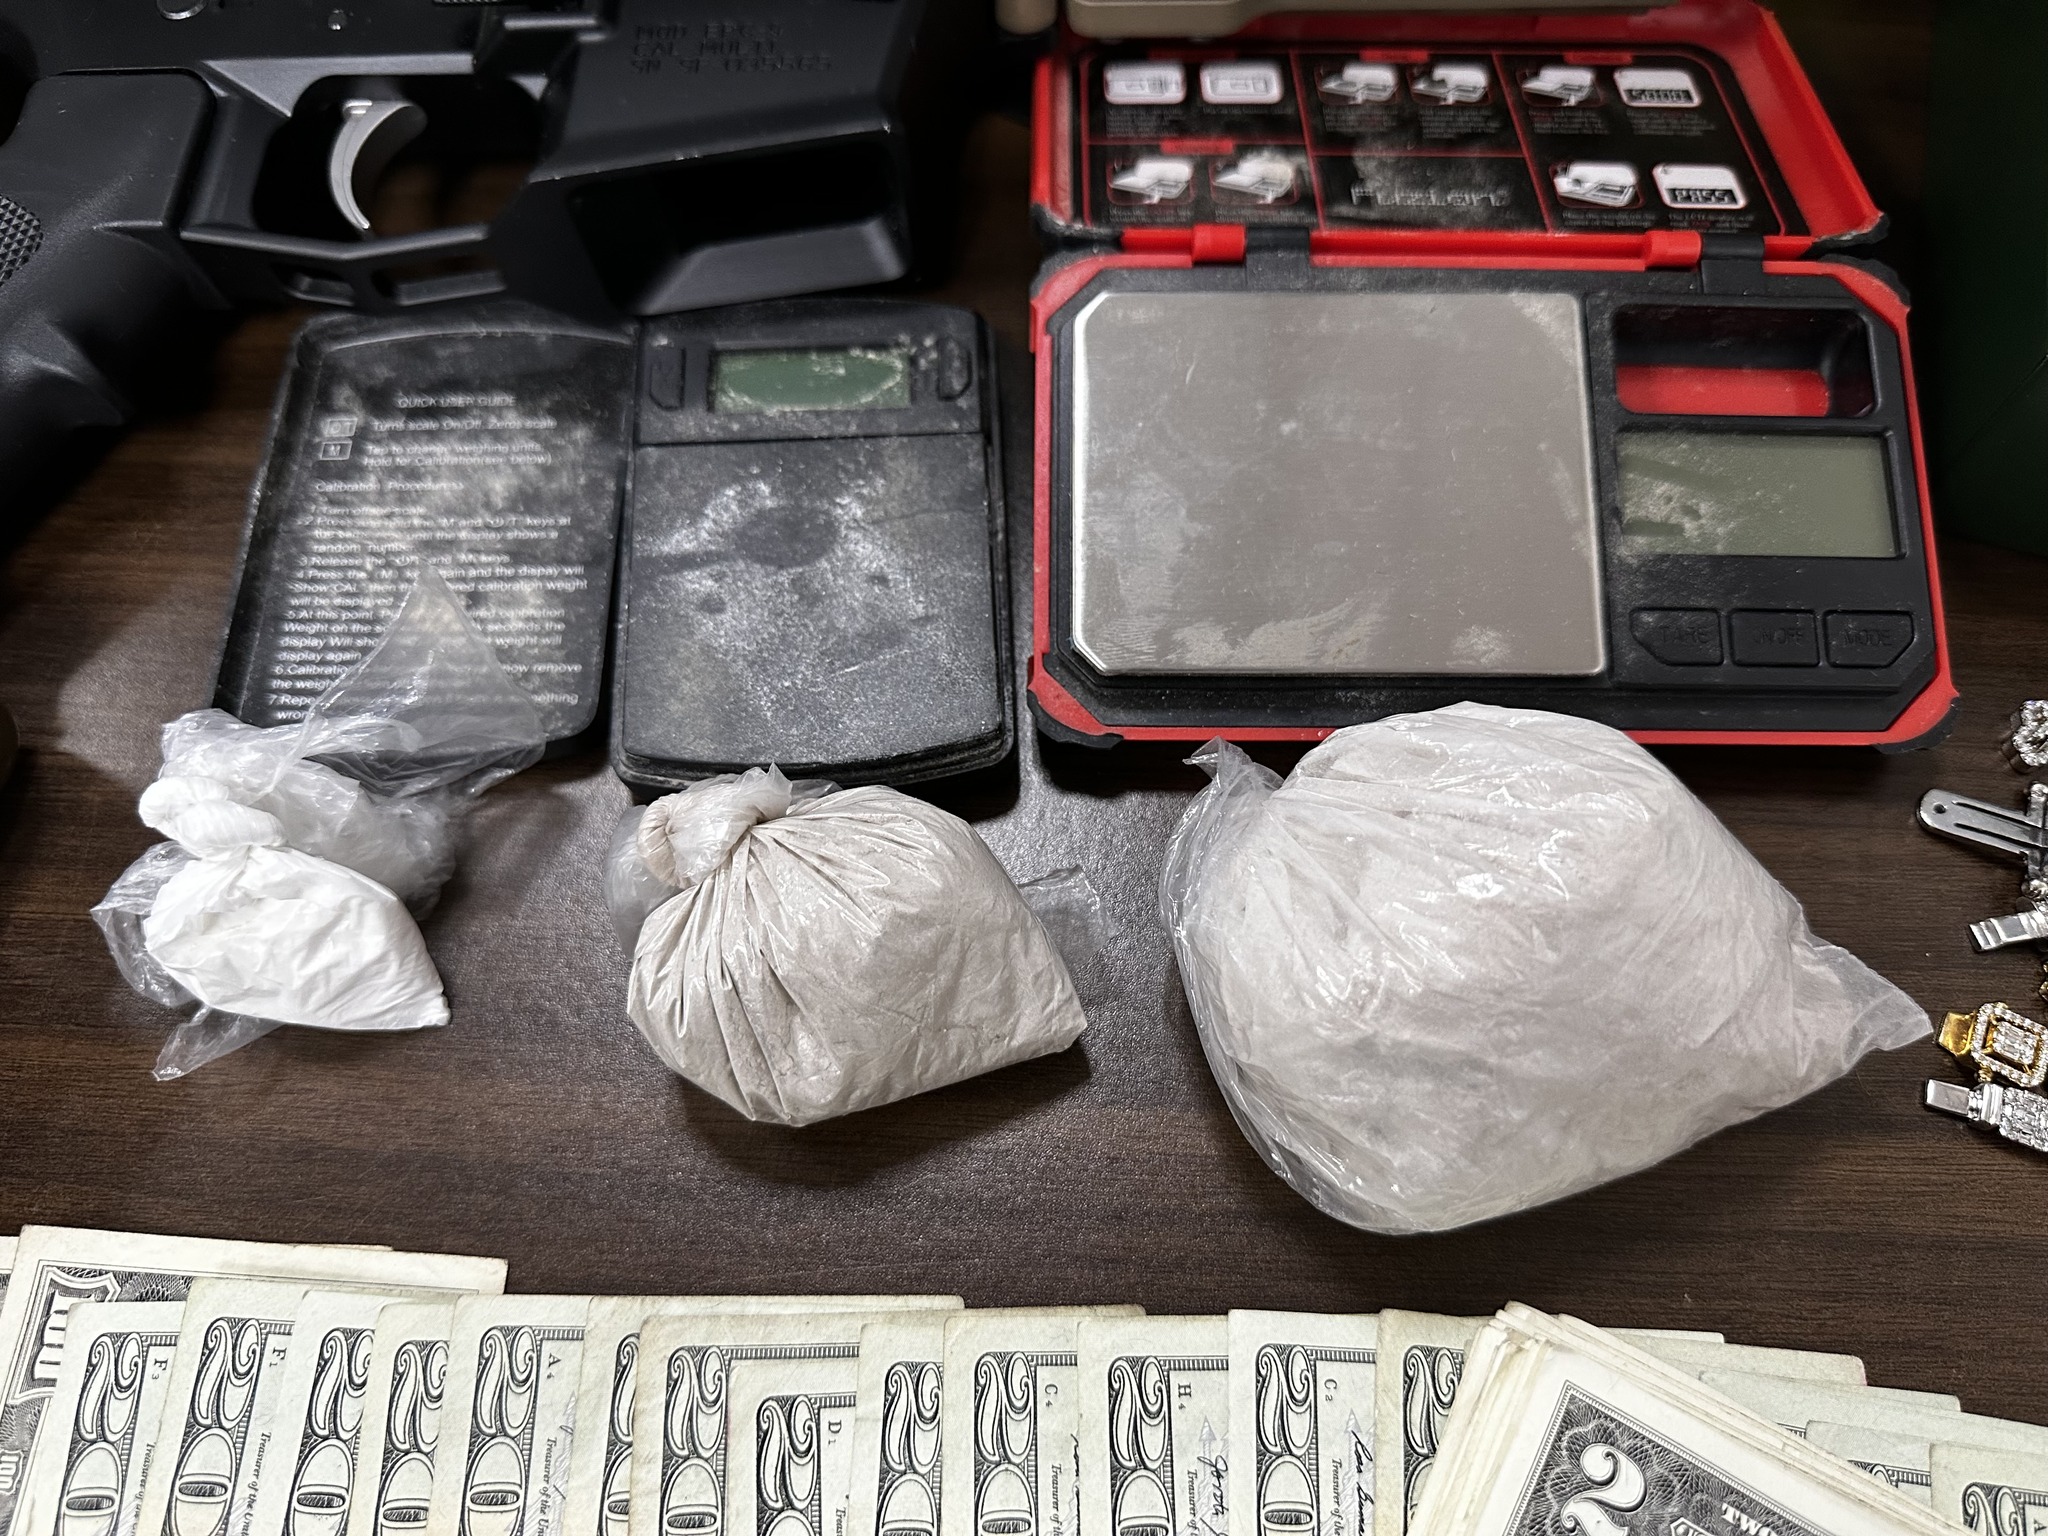 SBSO ARRESTS MAN ON NARCOTICS, WEAPONS CHARGES